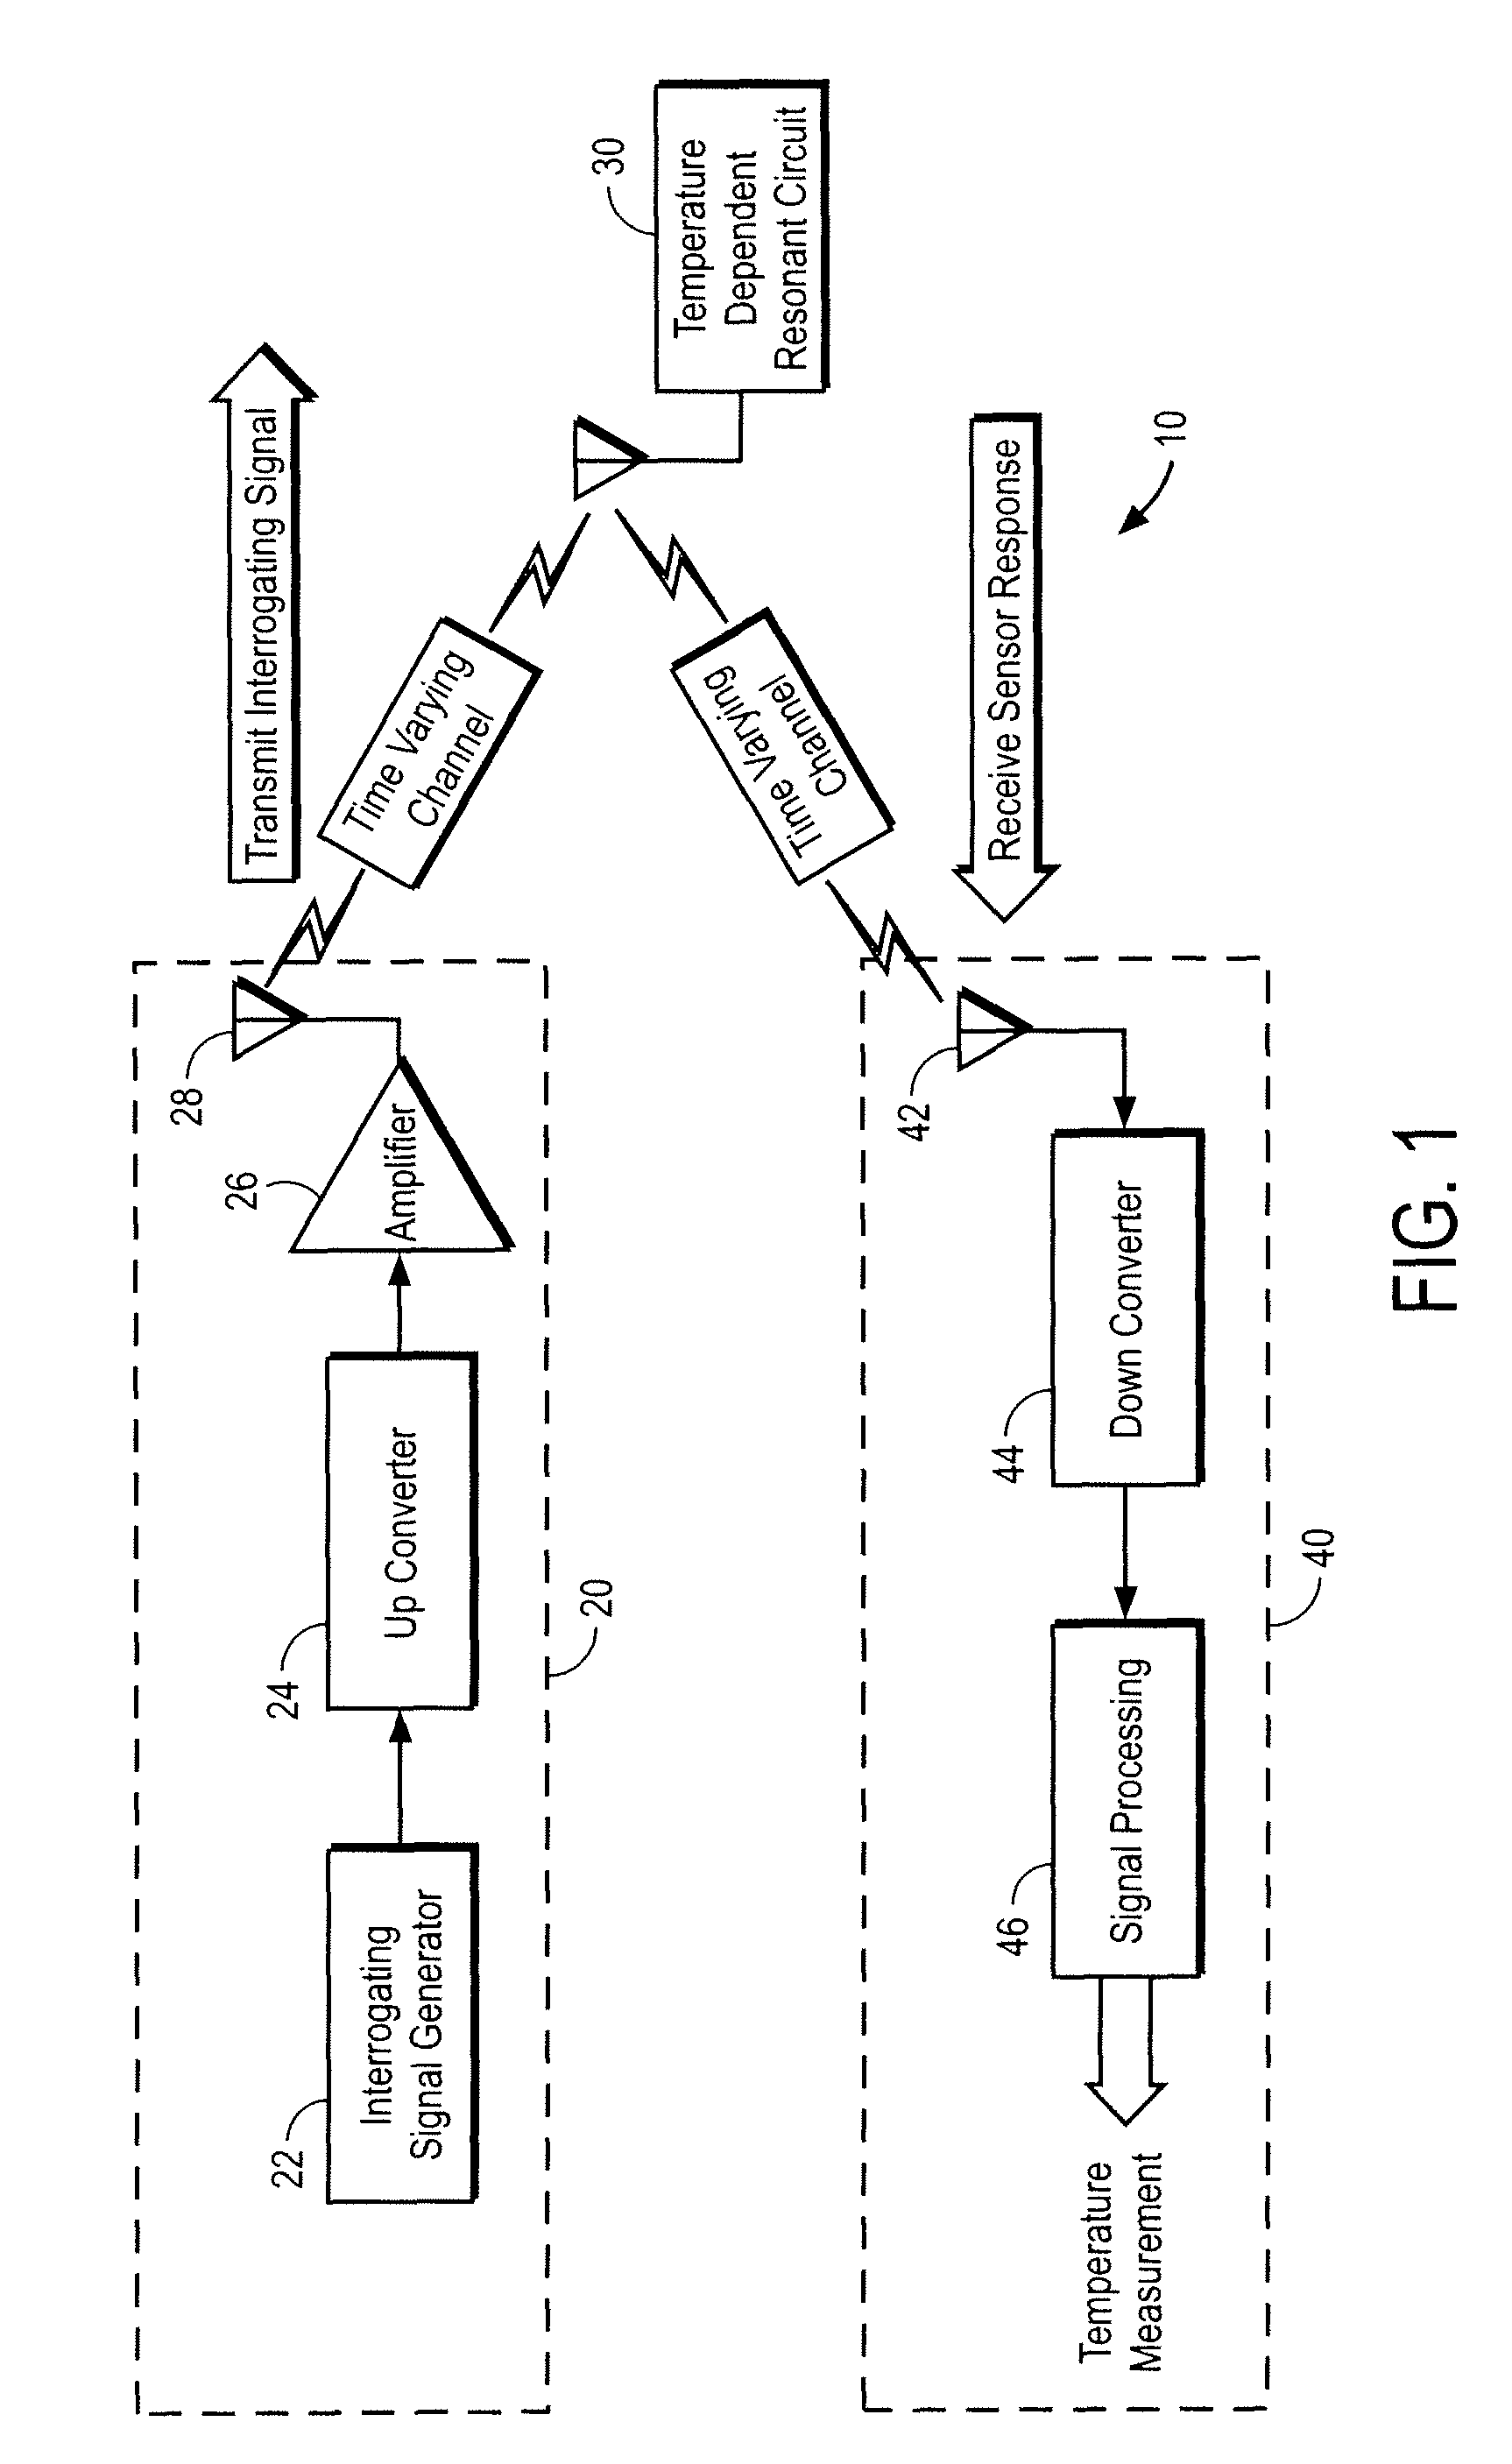 Wireless temperature measurement system and methods of making and using same